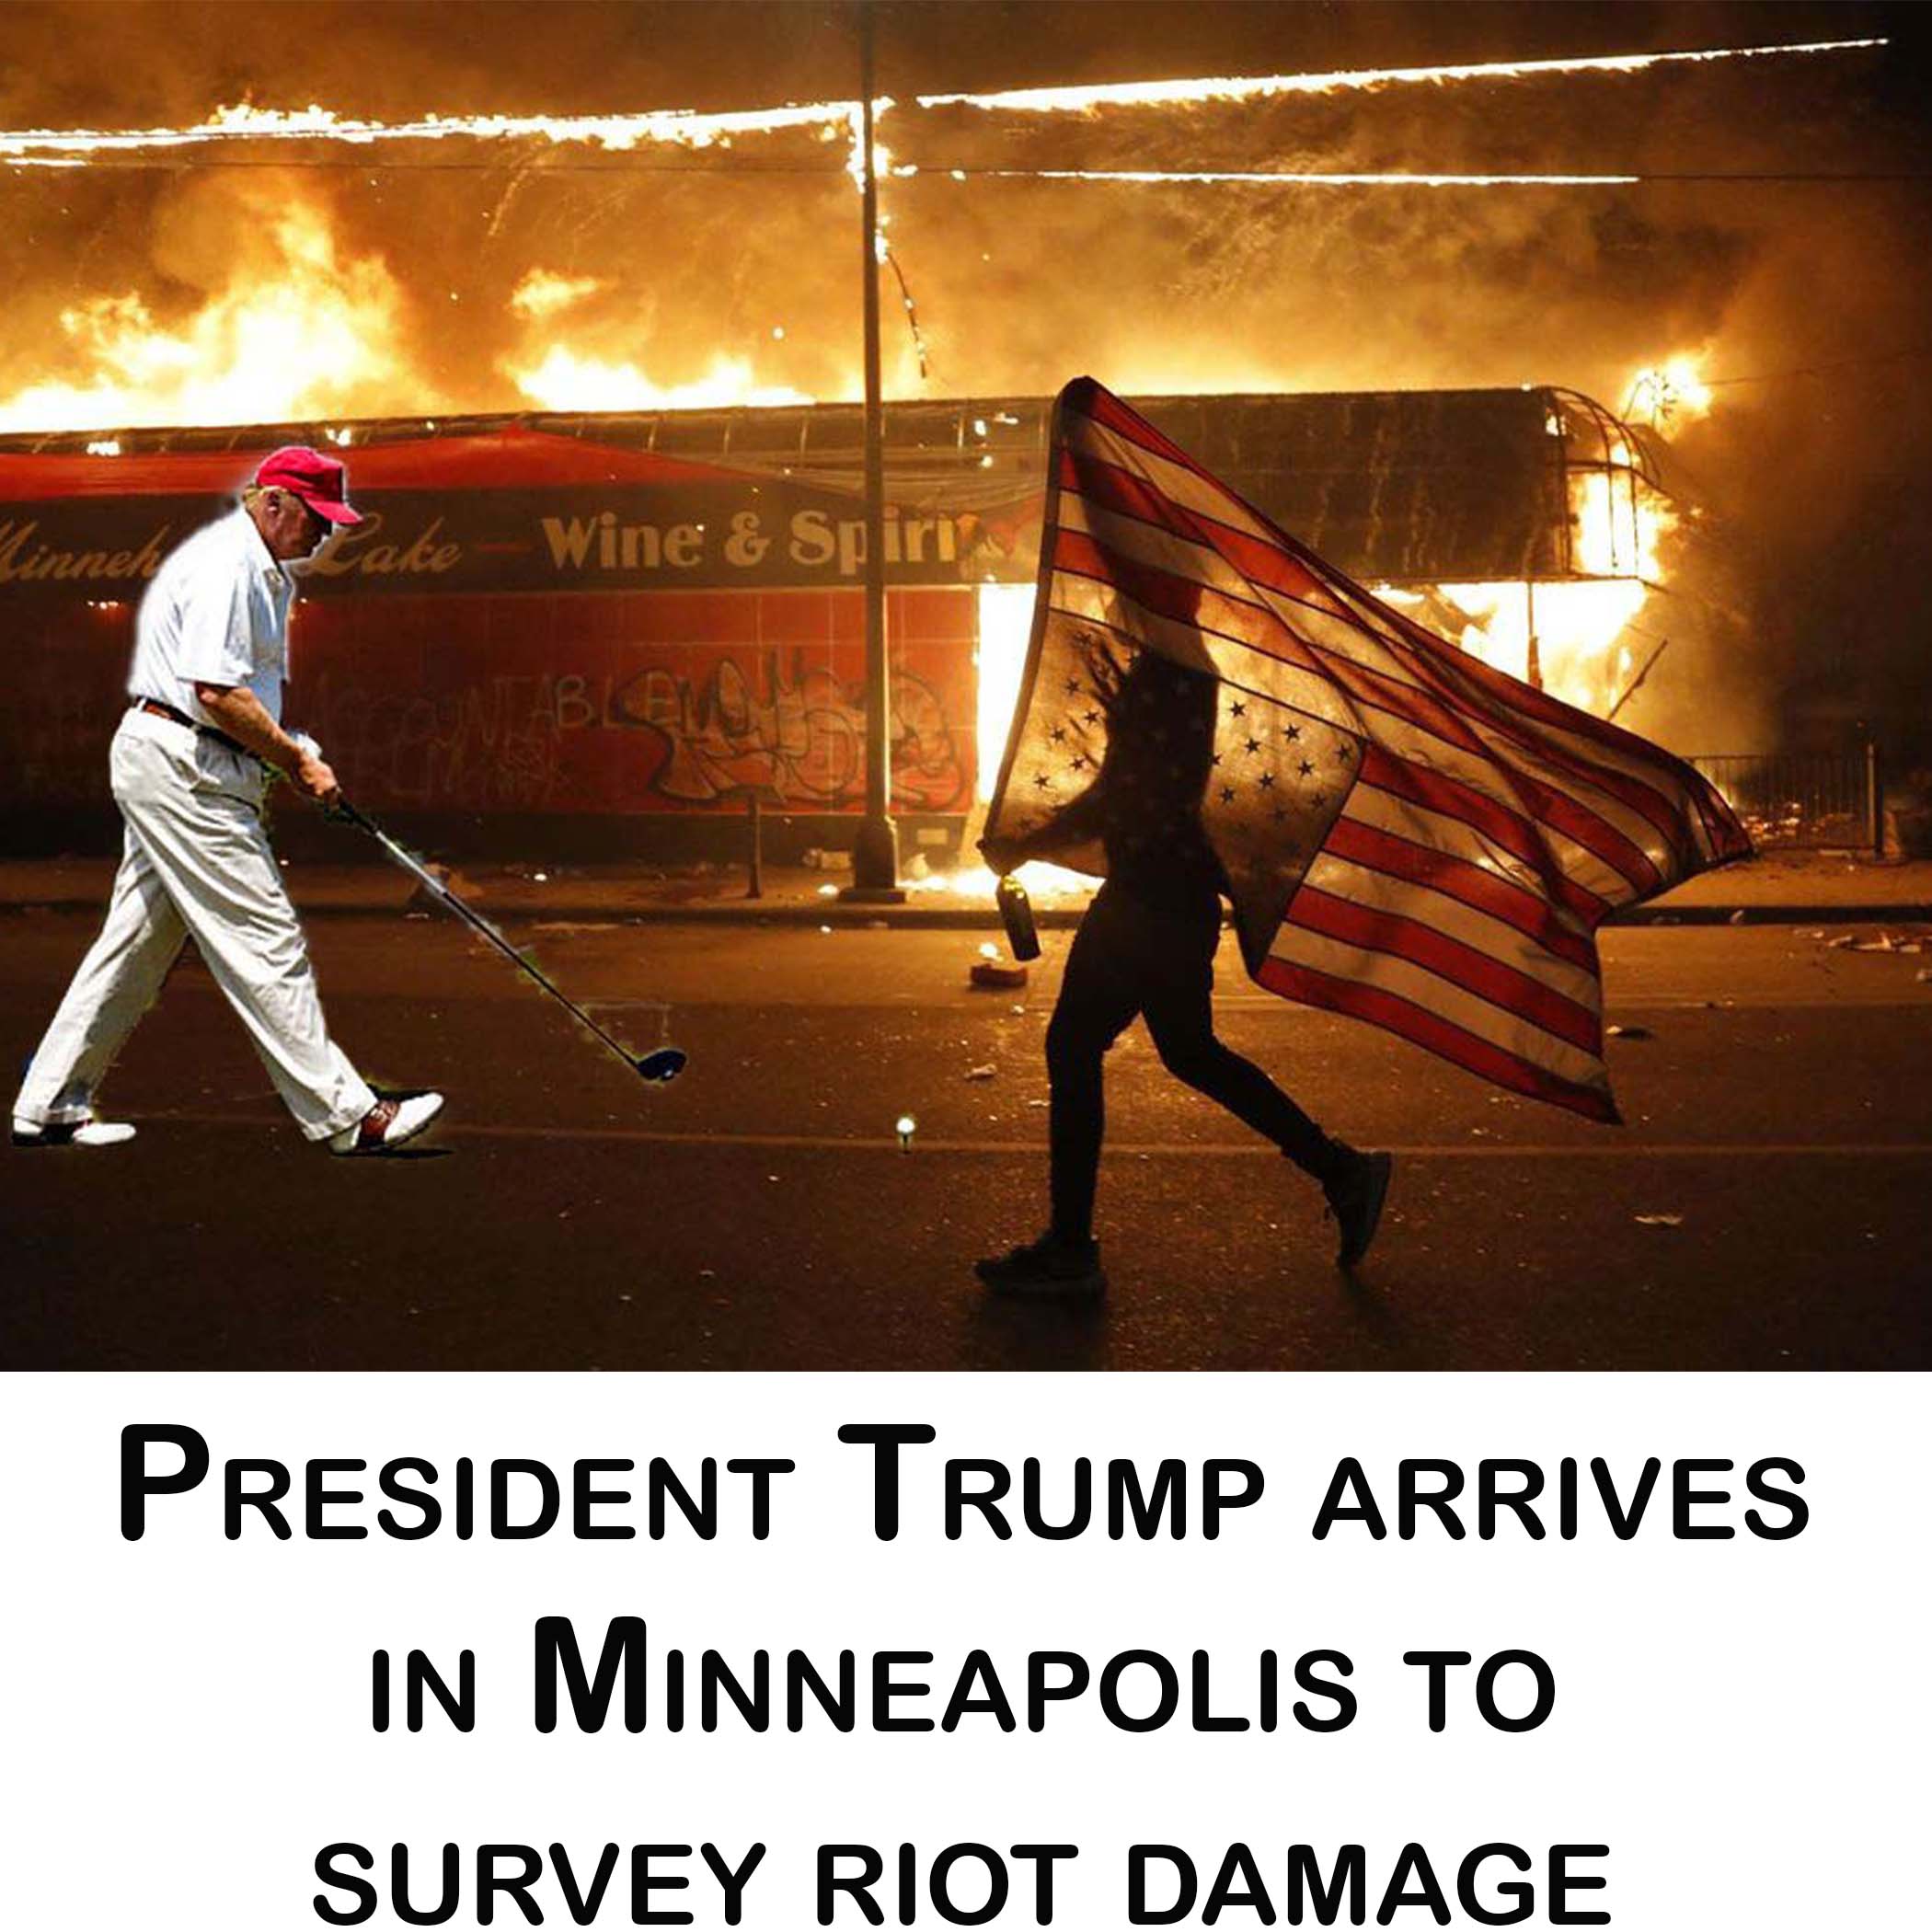 Priedent Trump arrives in Minneapolis to view the rioting damage